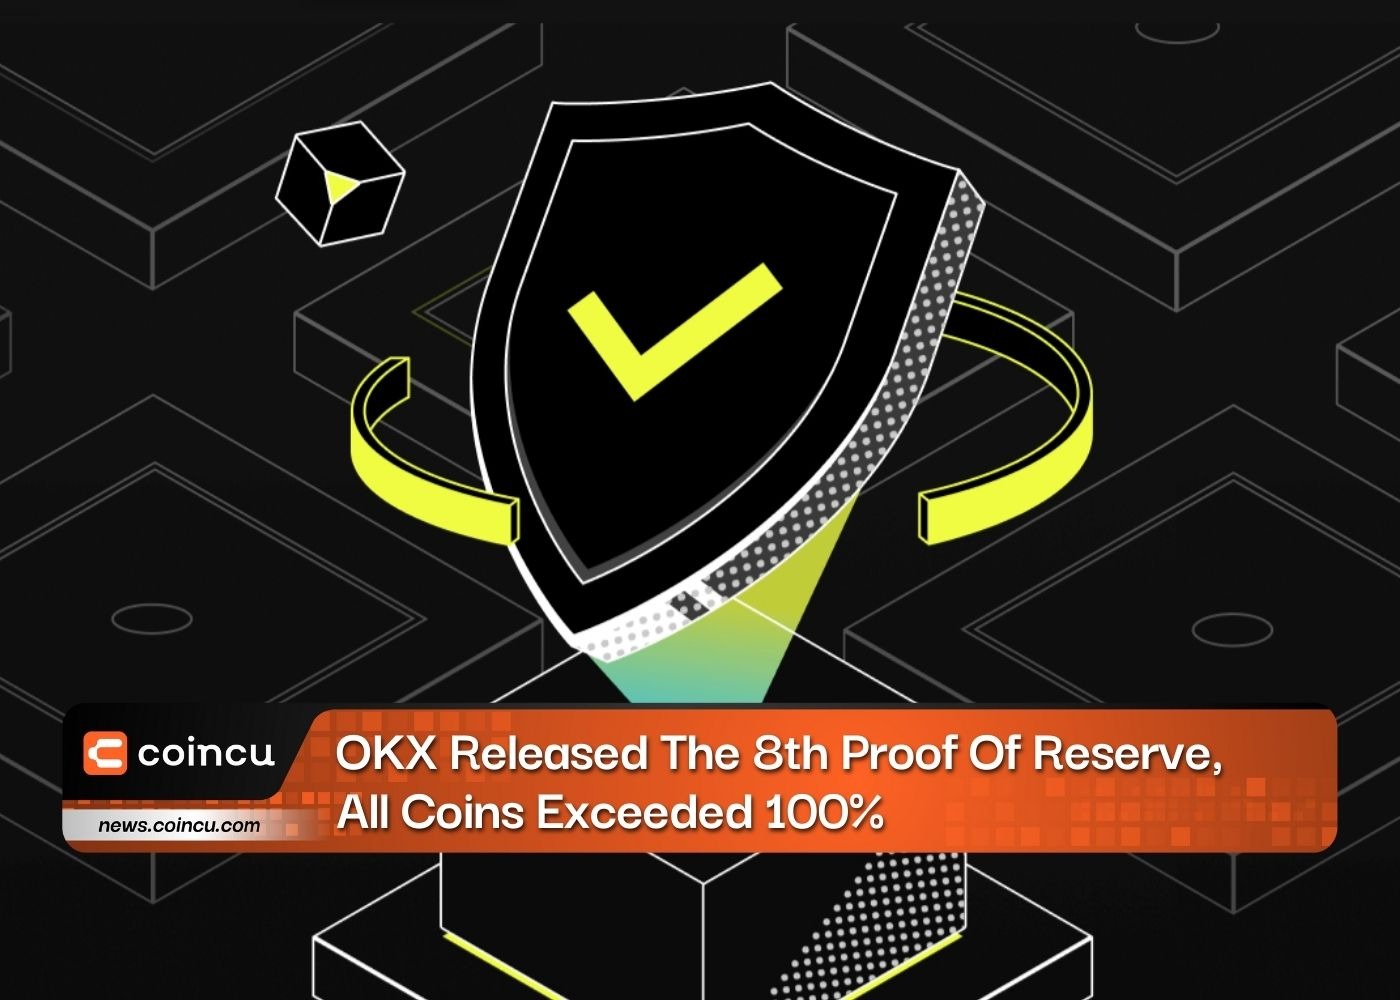 OKX Released The 8th Proof Of Reserve, All Coins Exceeded 100%